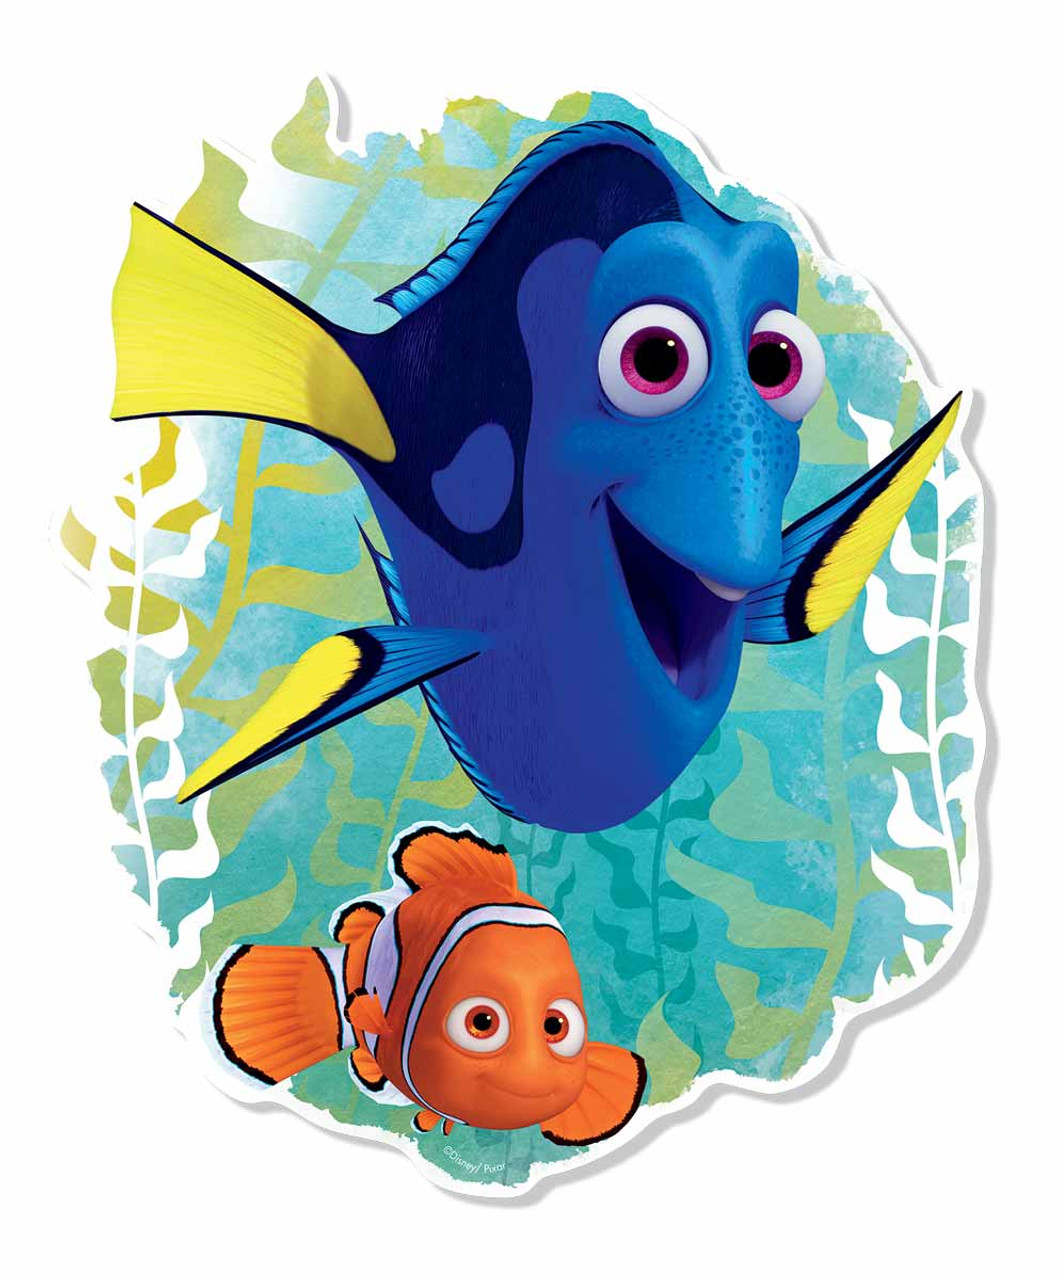 Finding with Nemo Cardboard Cutout Wall Art stock now at starstills.com